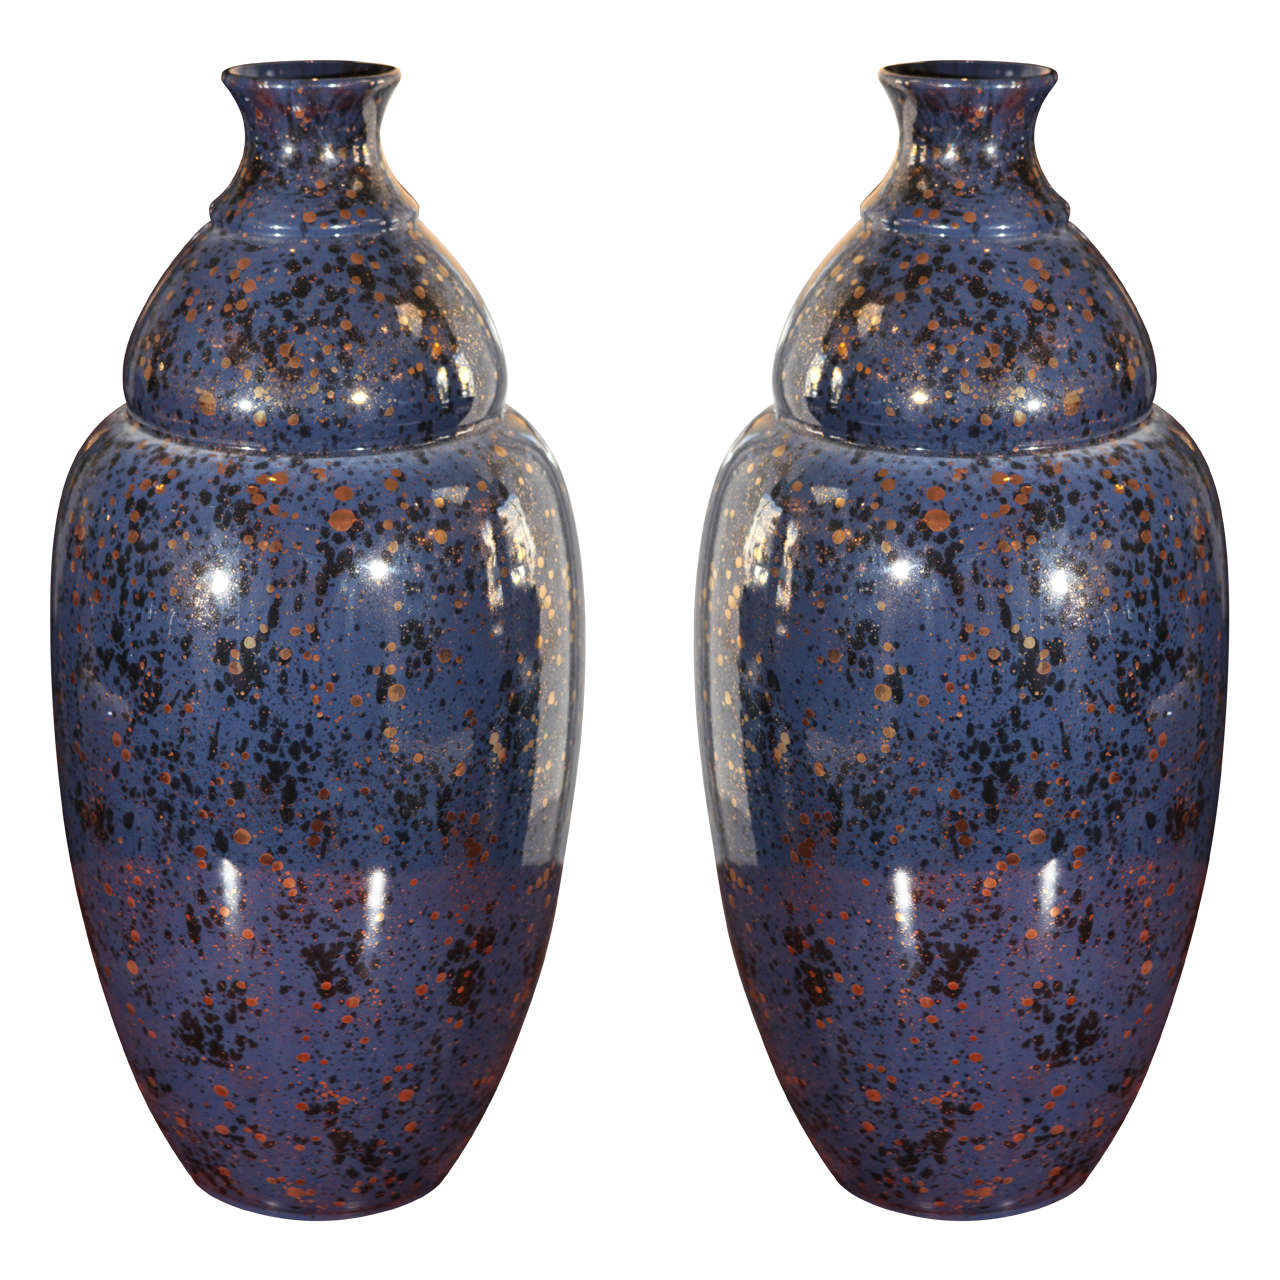 Pair of Jars Signed by M. Charolles